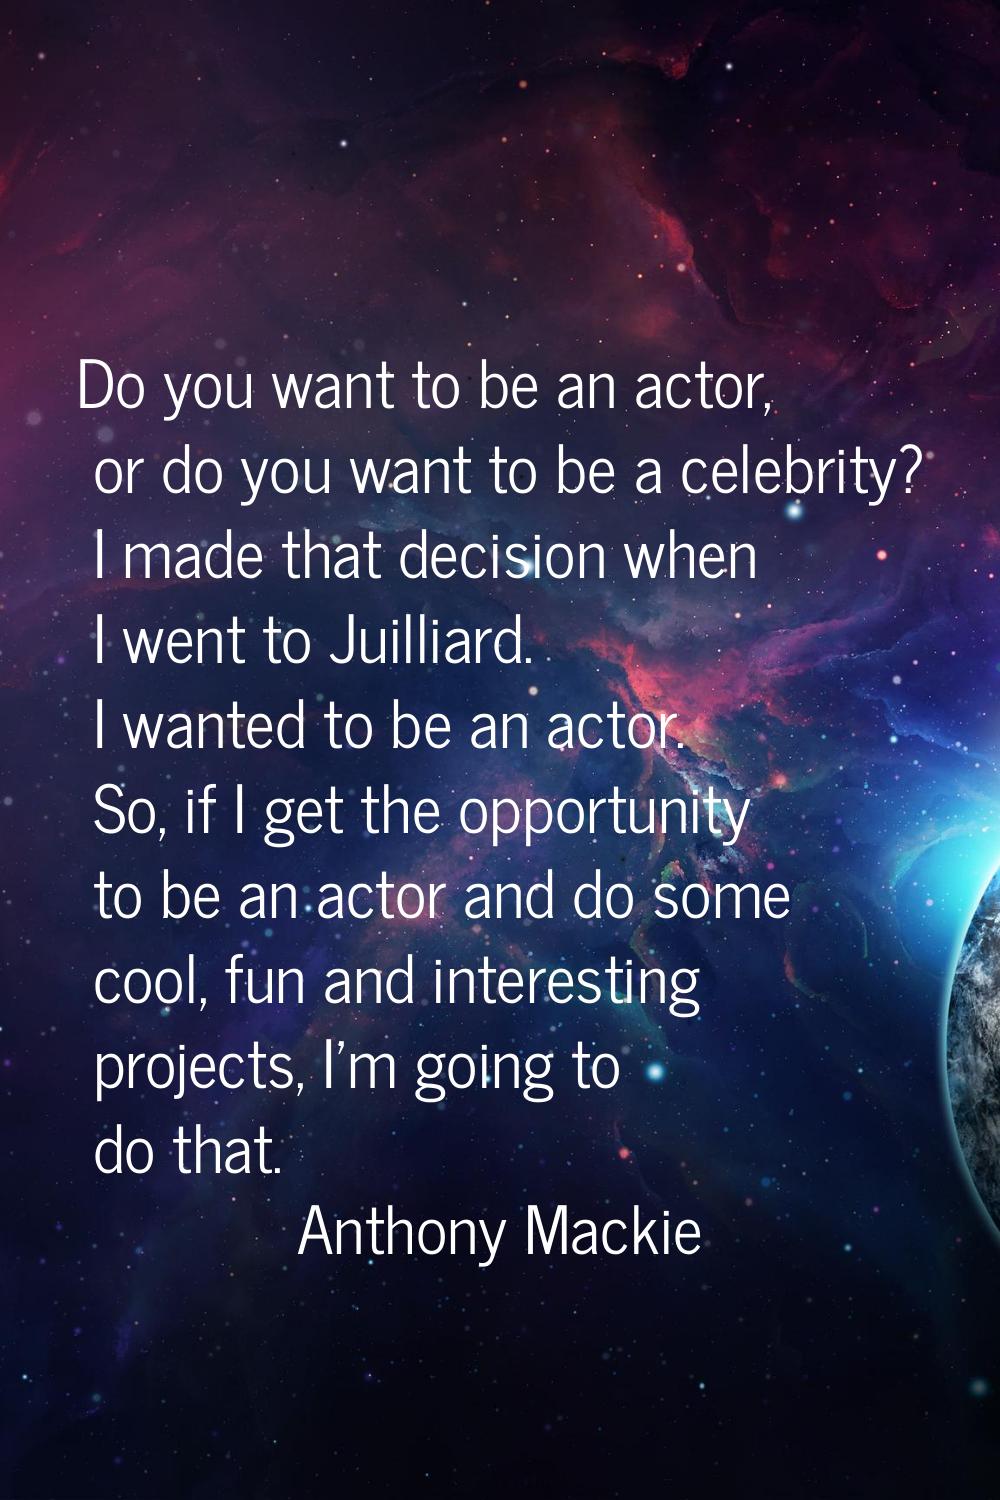 Do you want to be an actor, or do you want to be a celebrity? I made that decision when I went to J